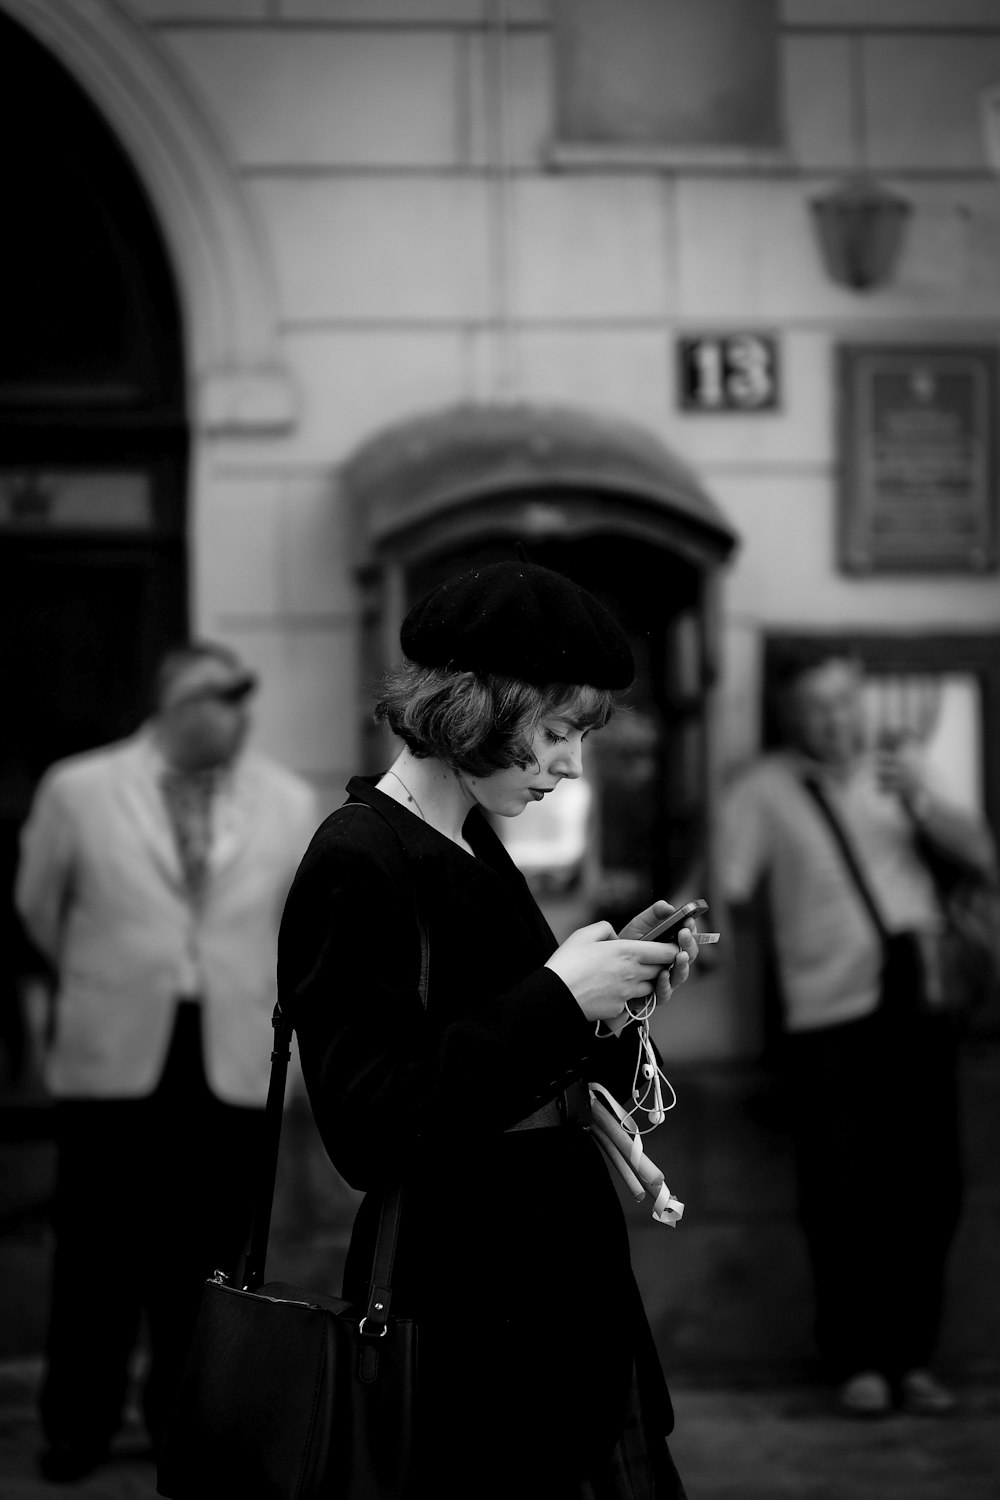 grayscale photo of woman using smartphone